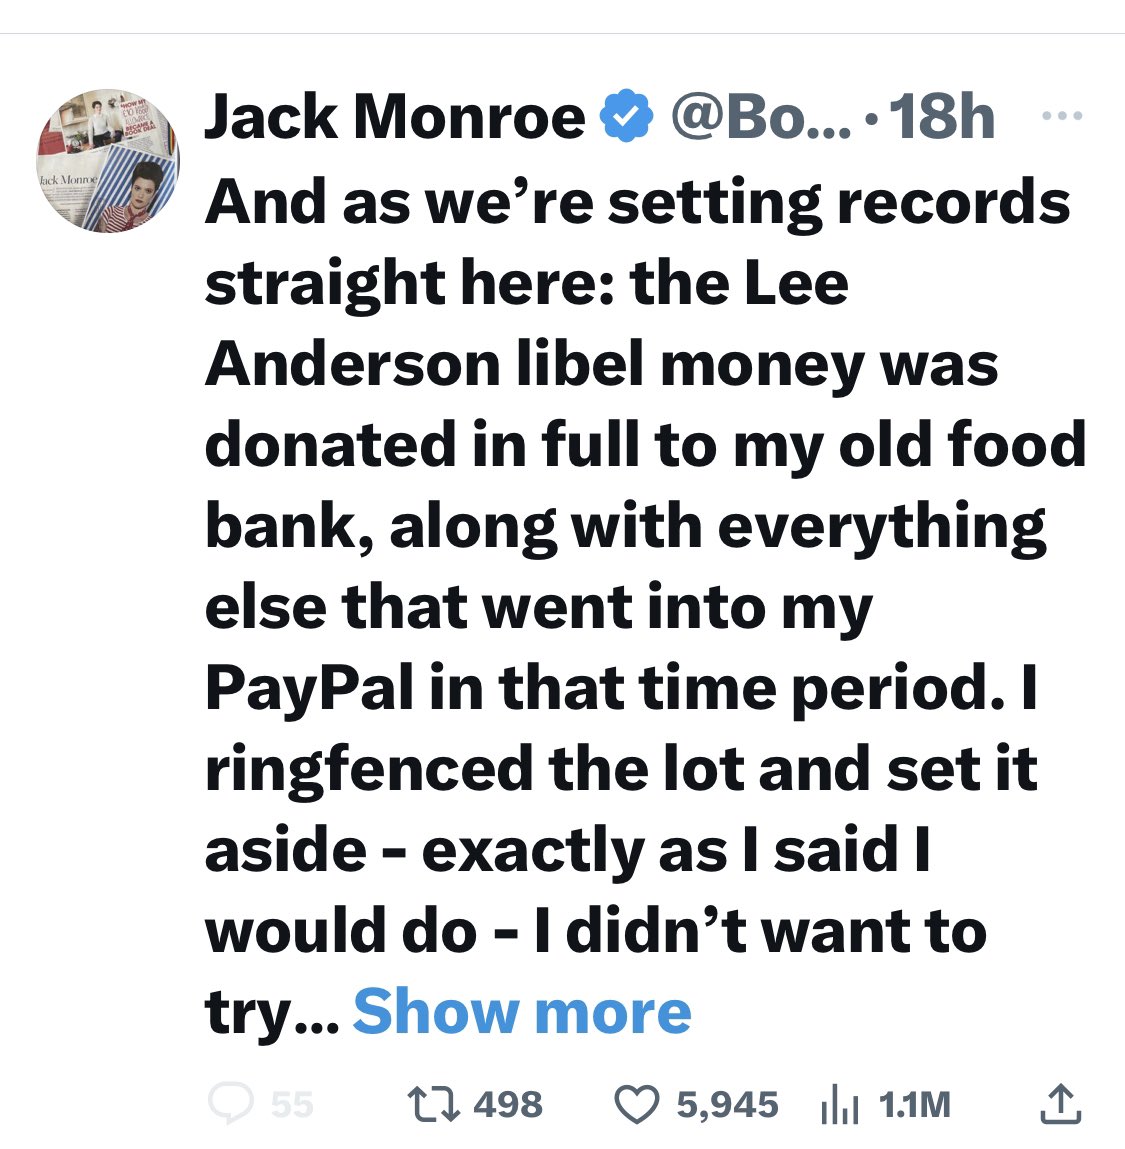 Hey @LeeAndersonMP_ - that crook Jack Monroe has used the phrase “the Lee Anderson libel money” - surely that suggests she won money from you in a libel case, when one didn’t exist. She is a truth twister and needs to be stopped